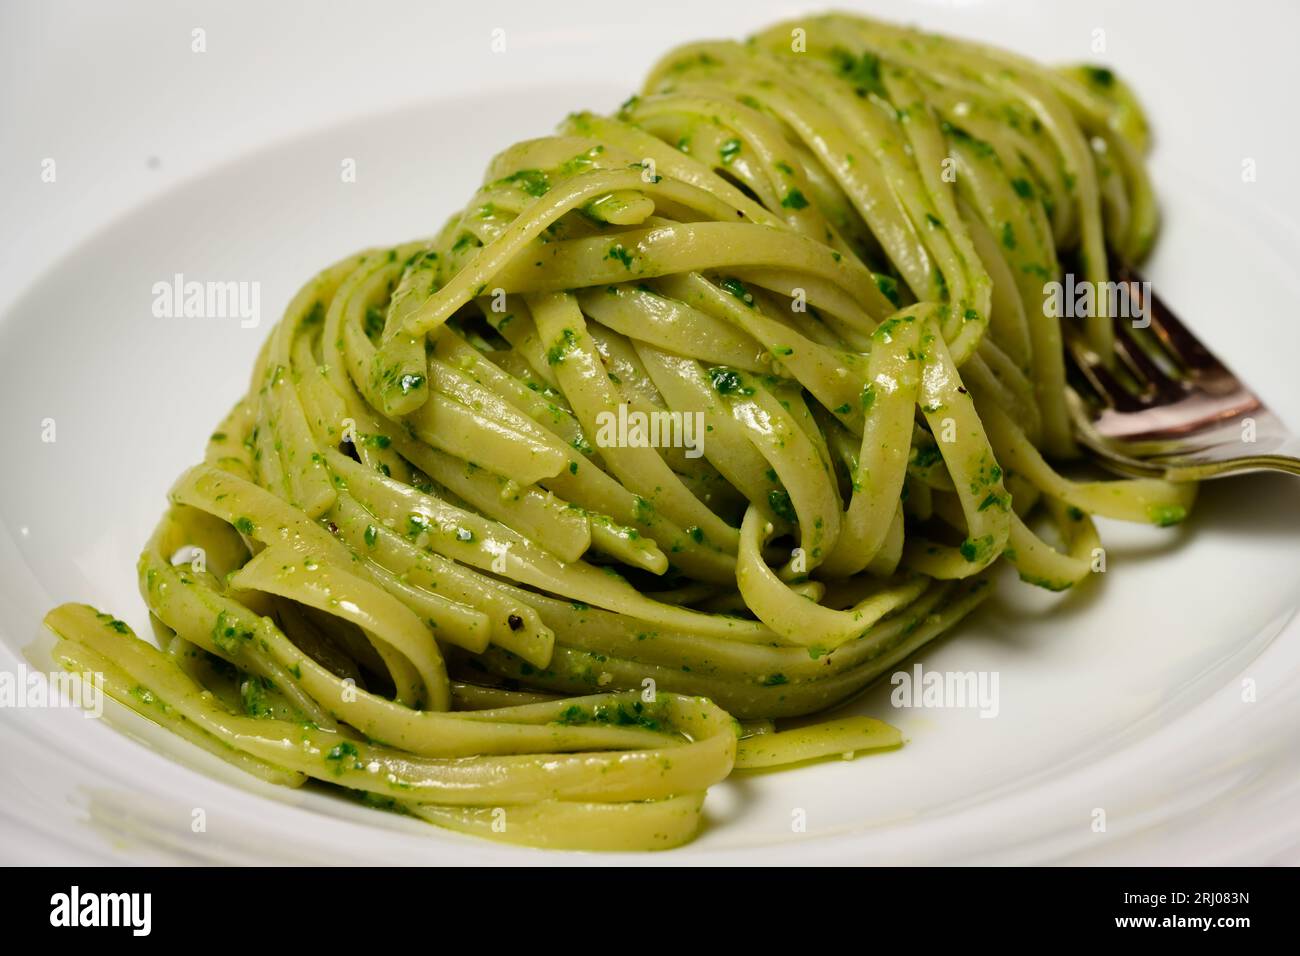 Trenette or Linguine Pasta with Green Pesto alla Genovese with Basil Stock Photo